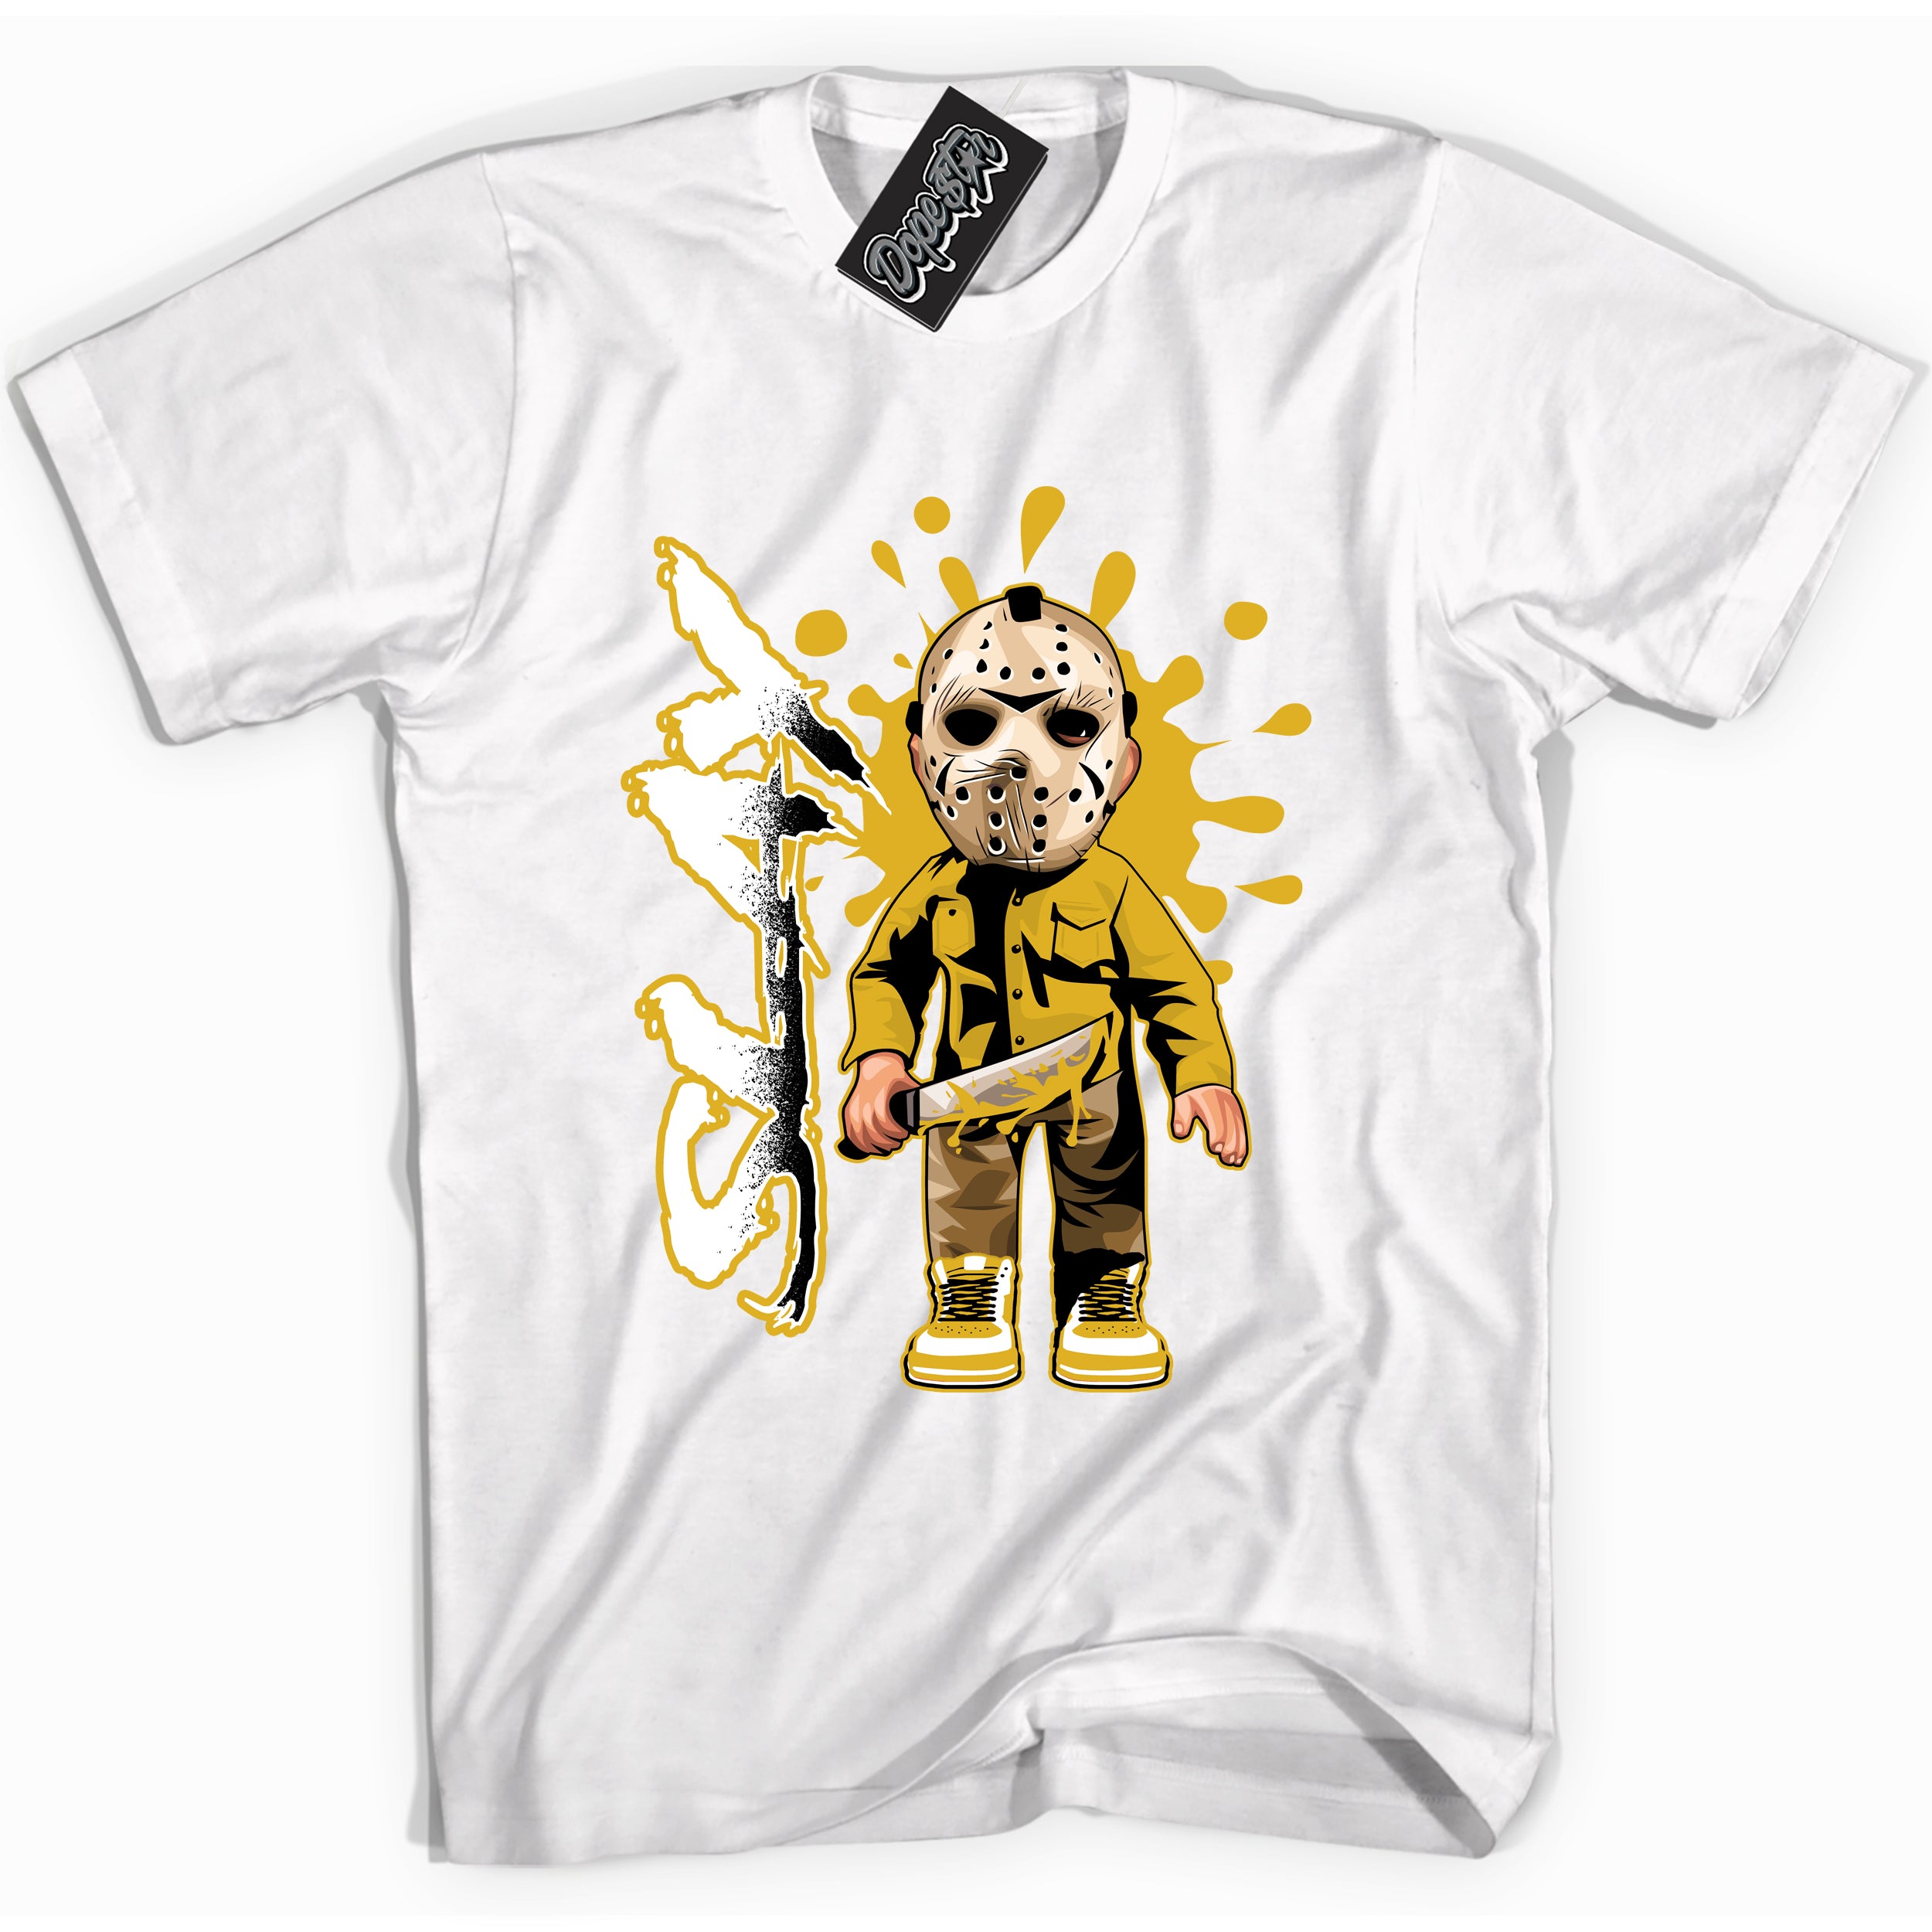 Cool White Shirt with “ Slay” design that perfectly matches Yellow Ochre 6s Sneakers.